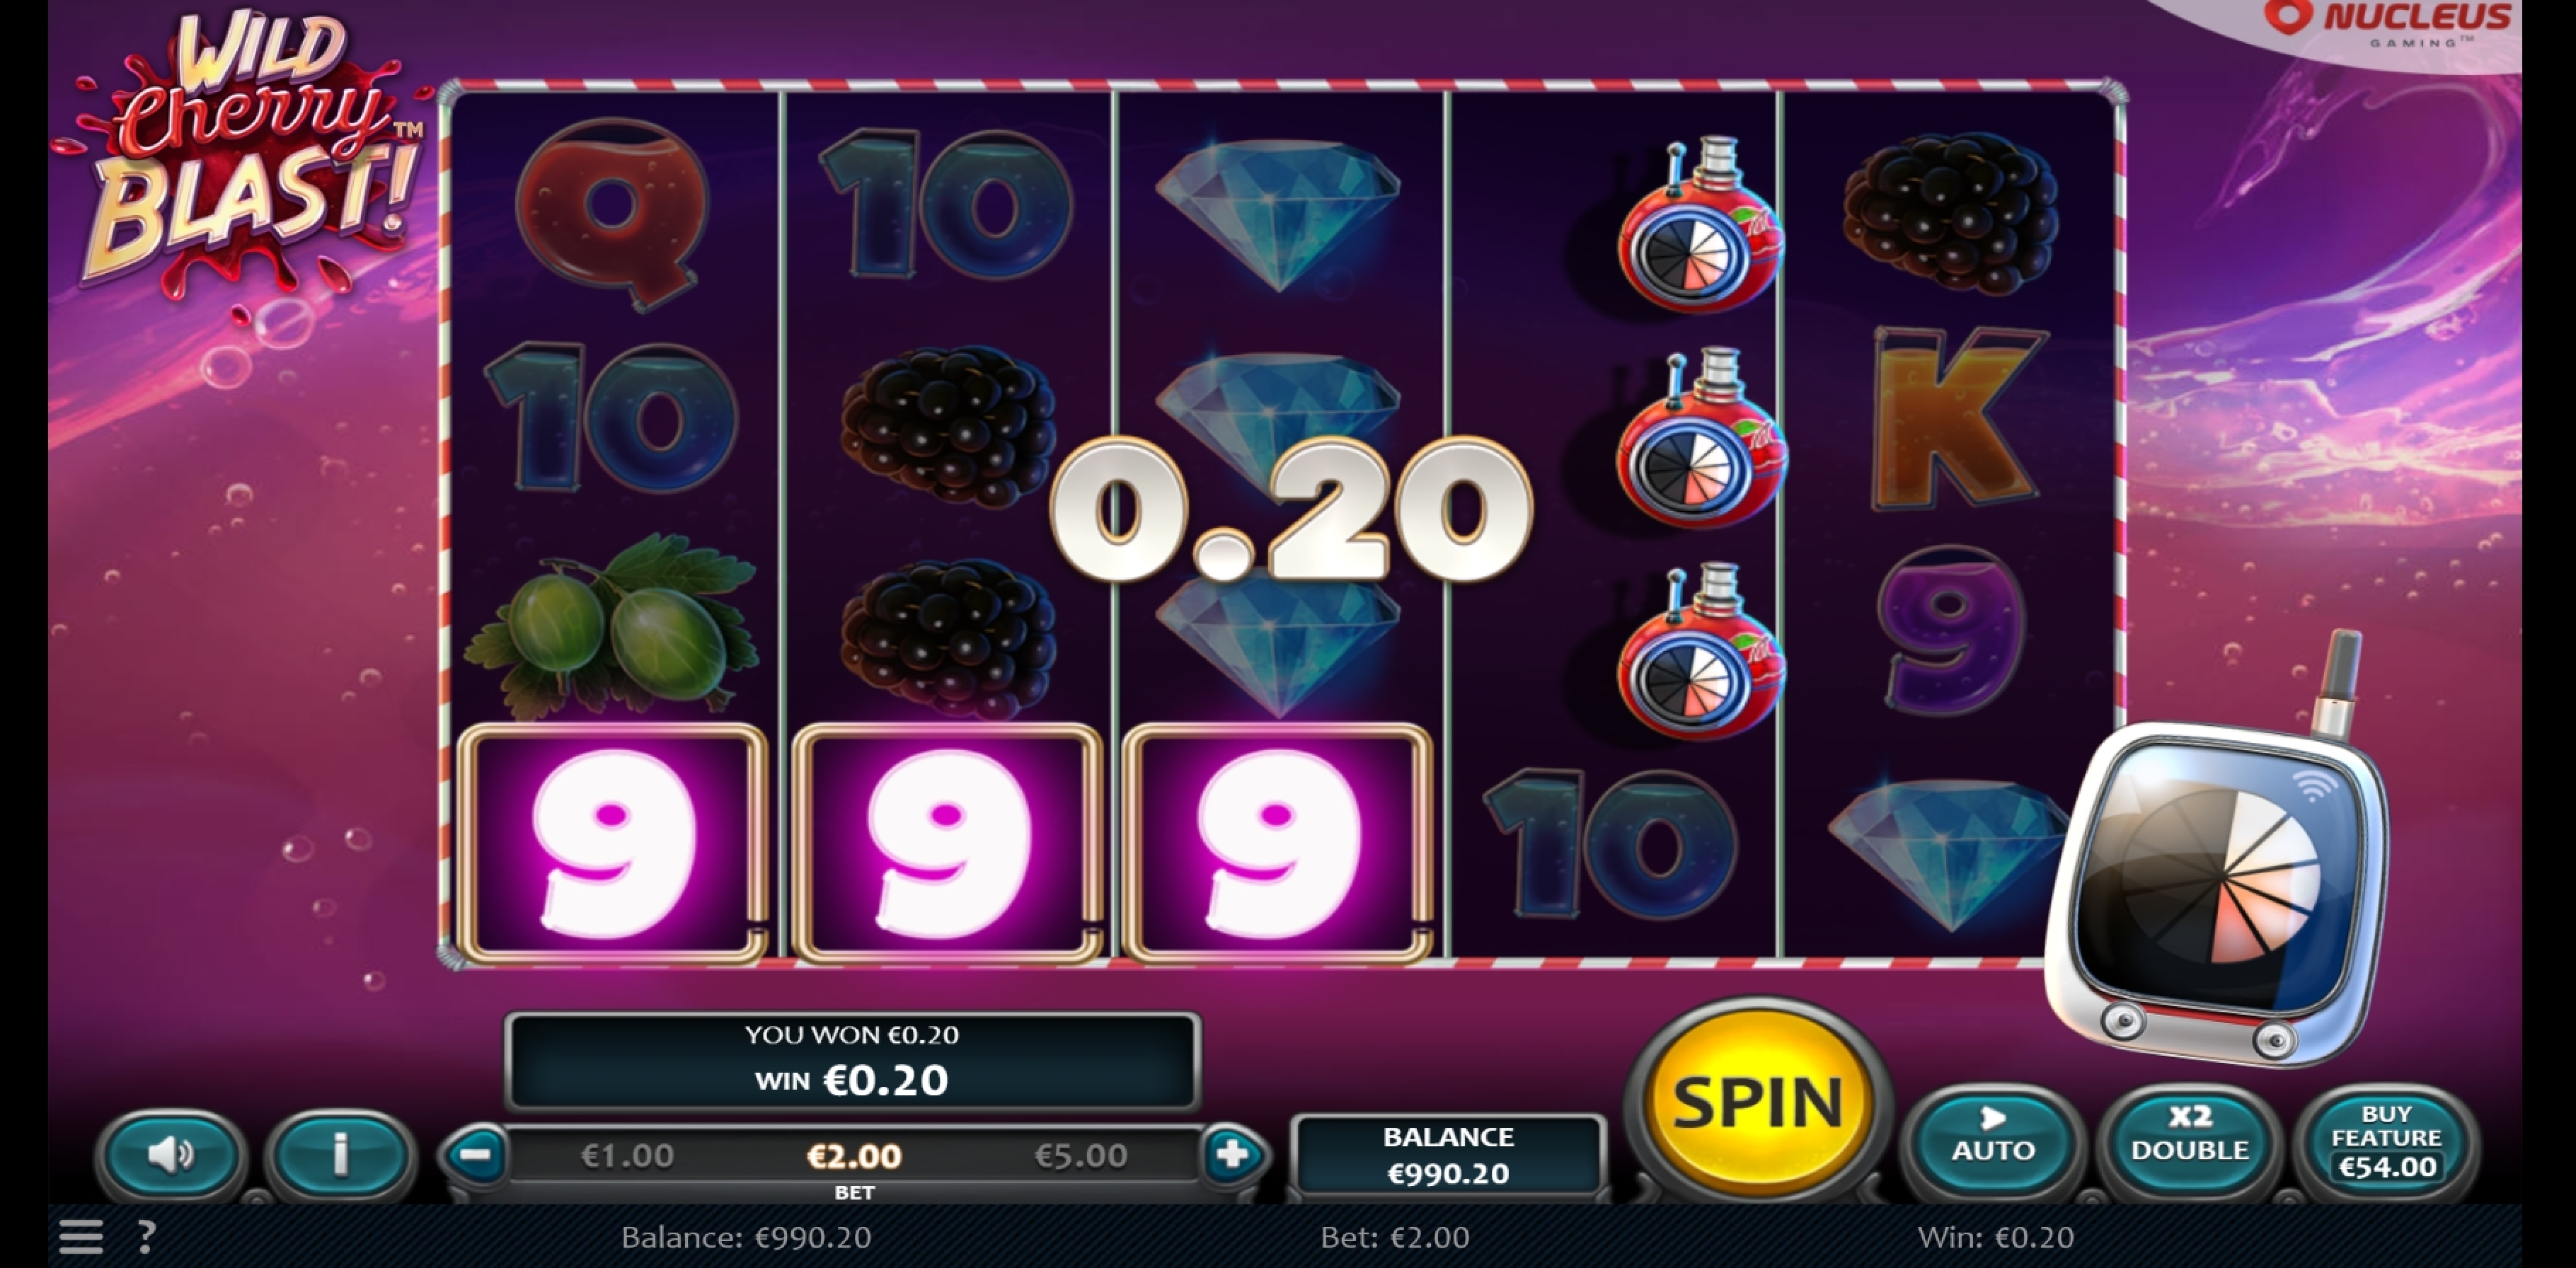 Win Money in Wild Cherry Blast Free Slot Game by Nucleus Gaming